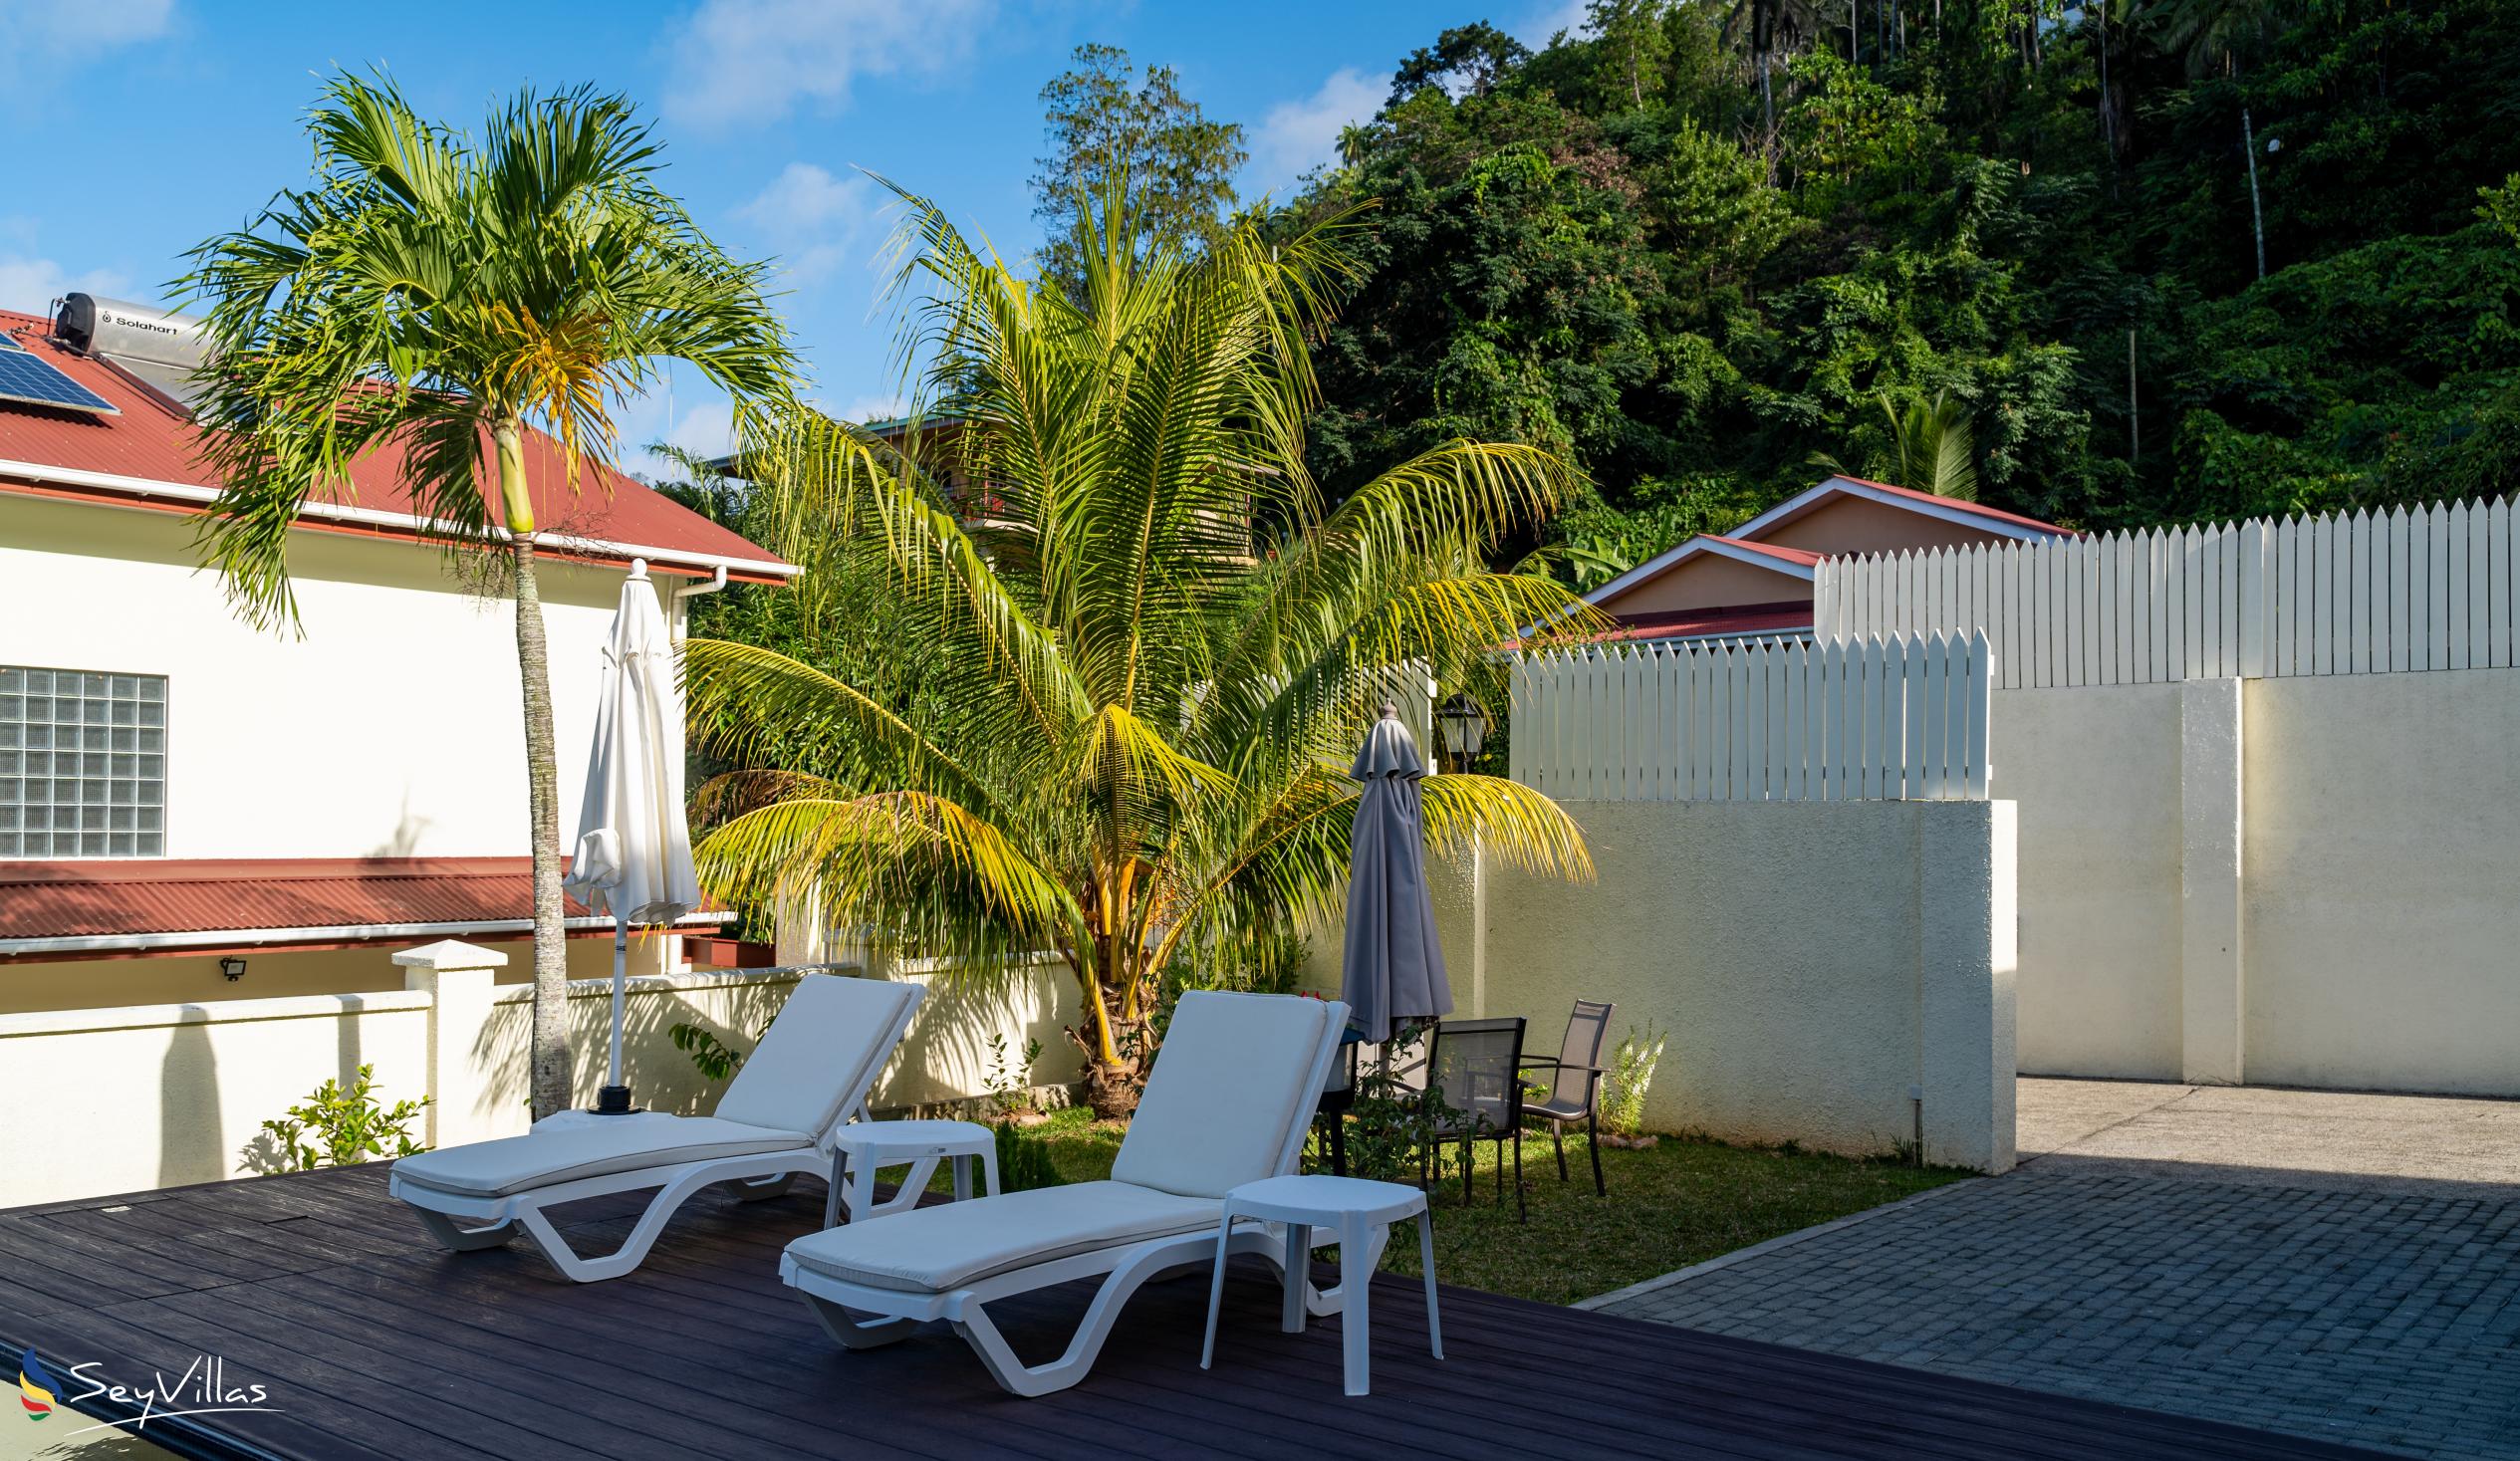 Foto 19: Emma's Guest House and Self-Catering - Esterno - Mahé (Seychelles)